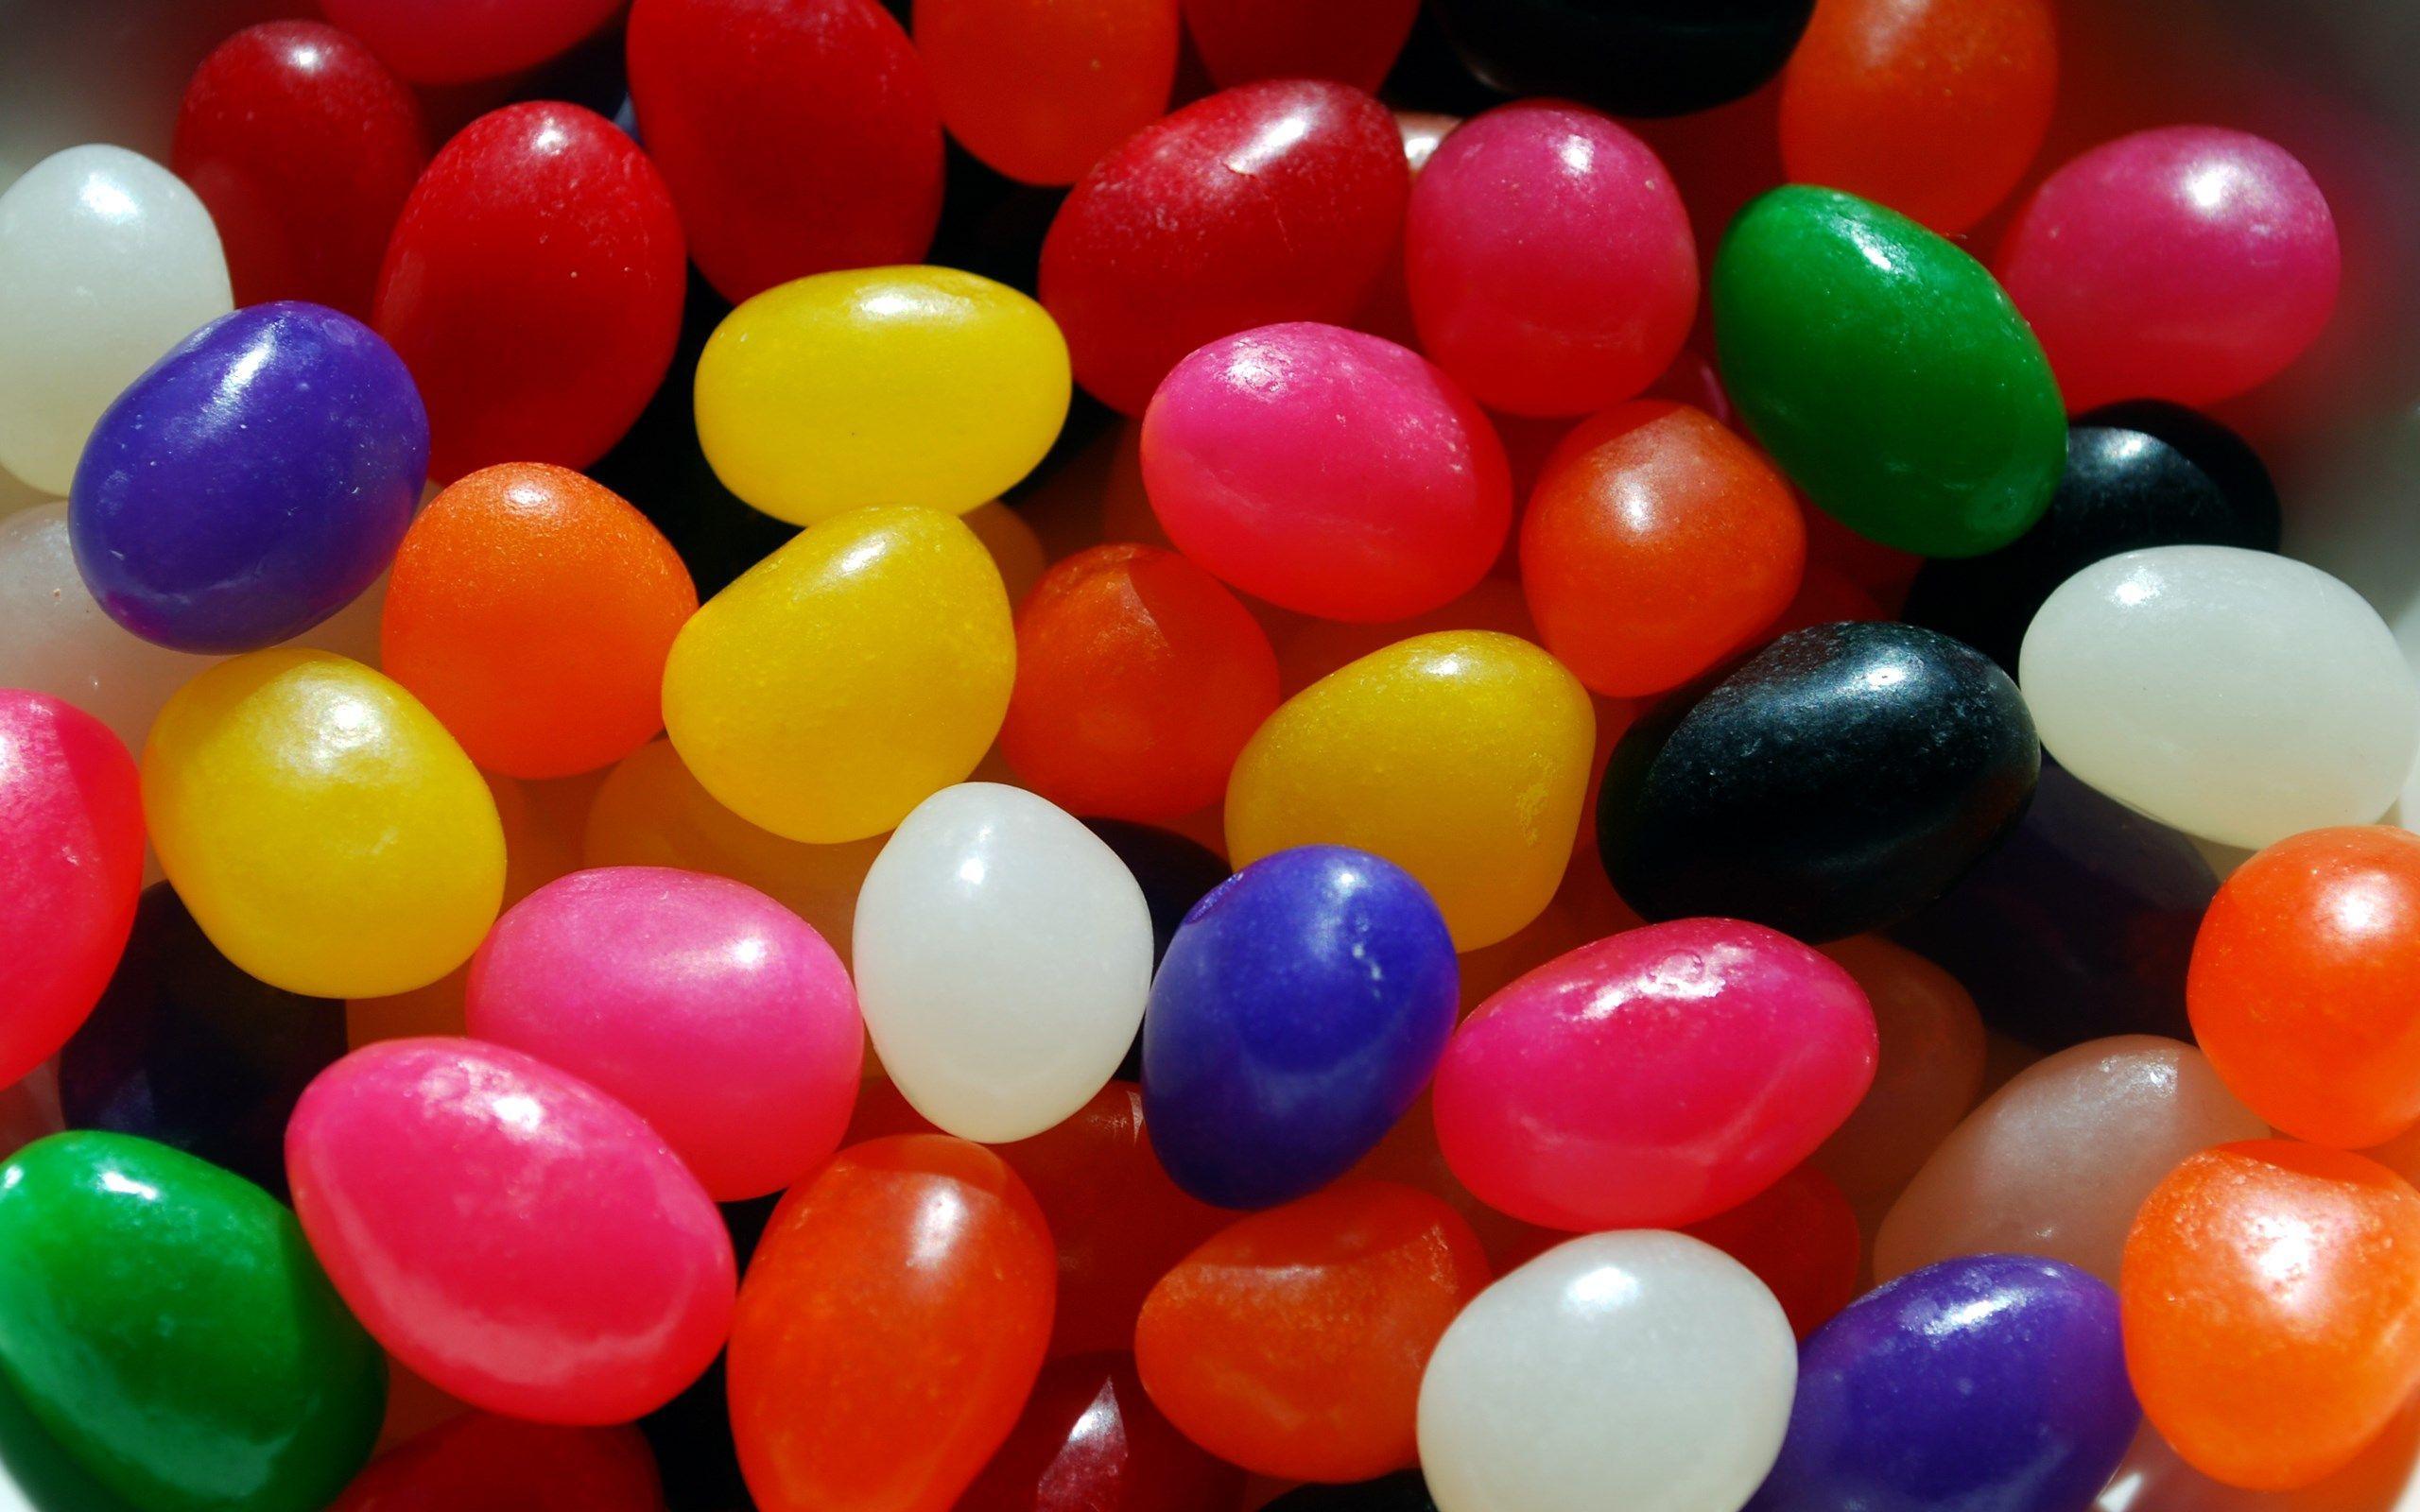 Jelly Beans Wallpapers